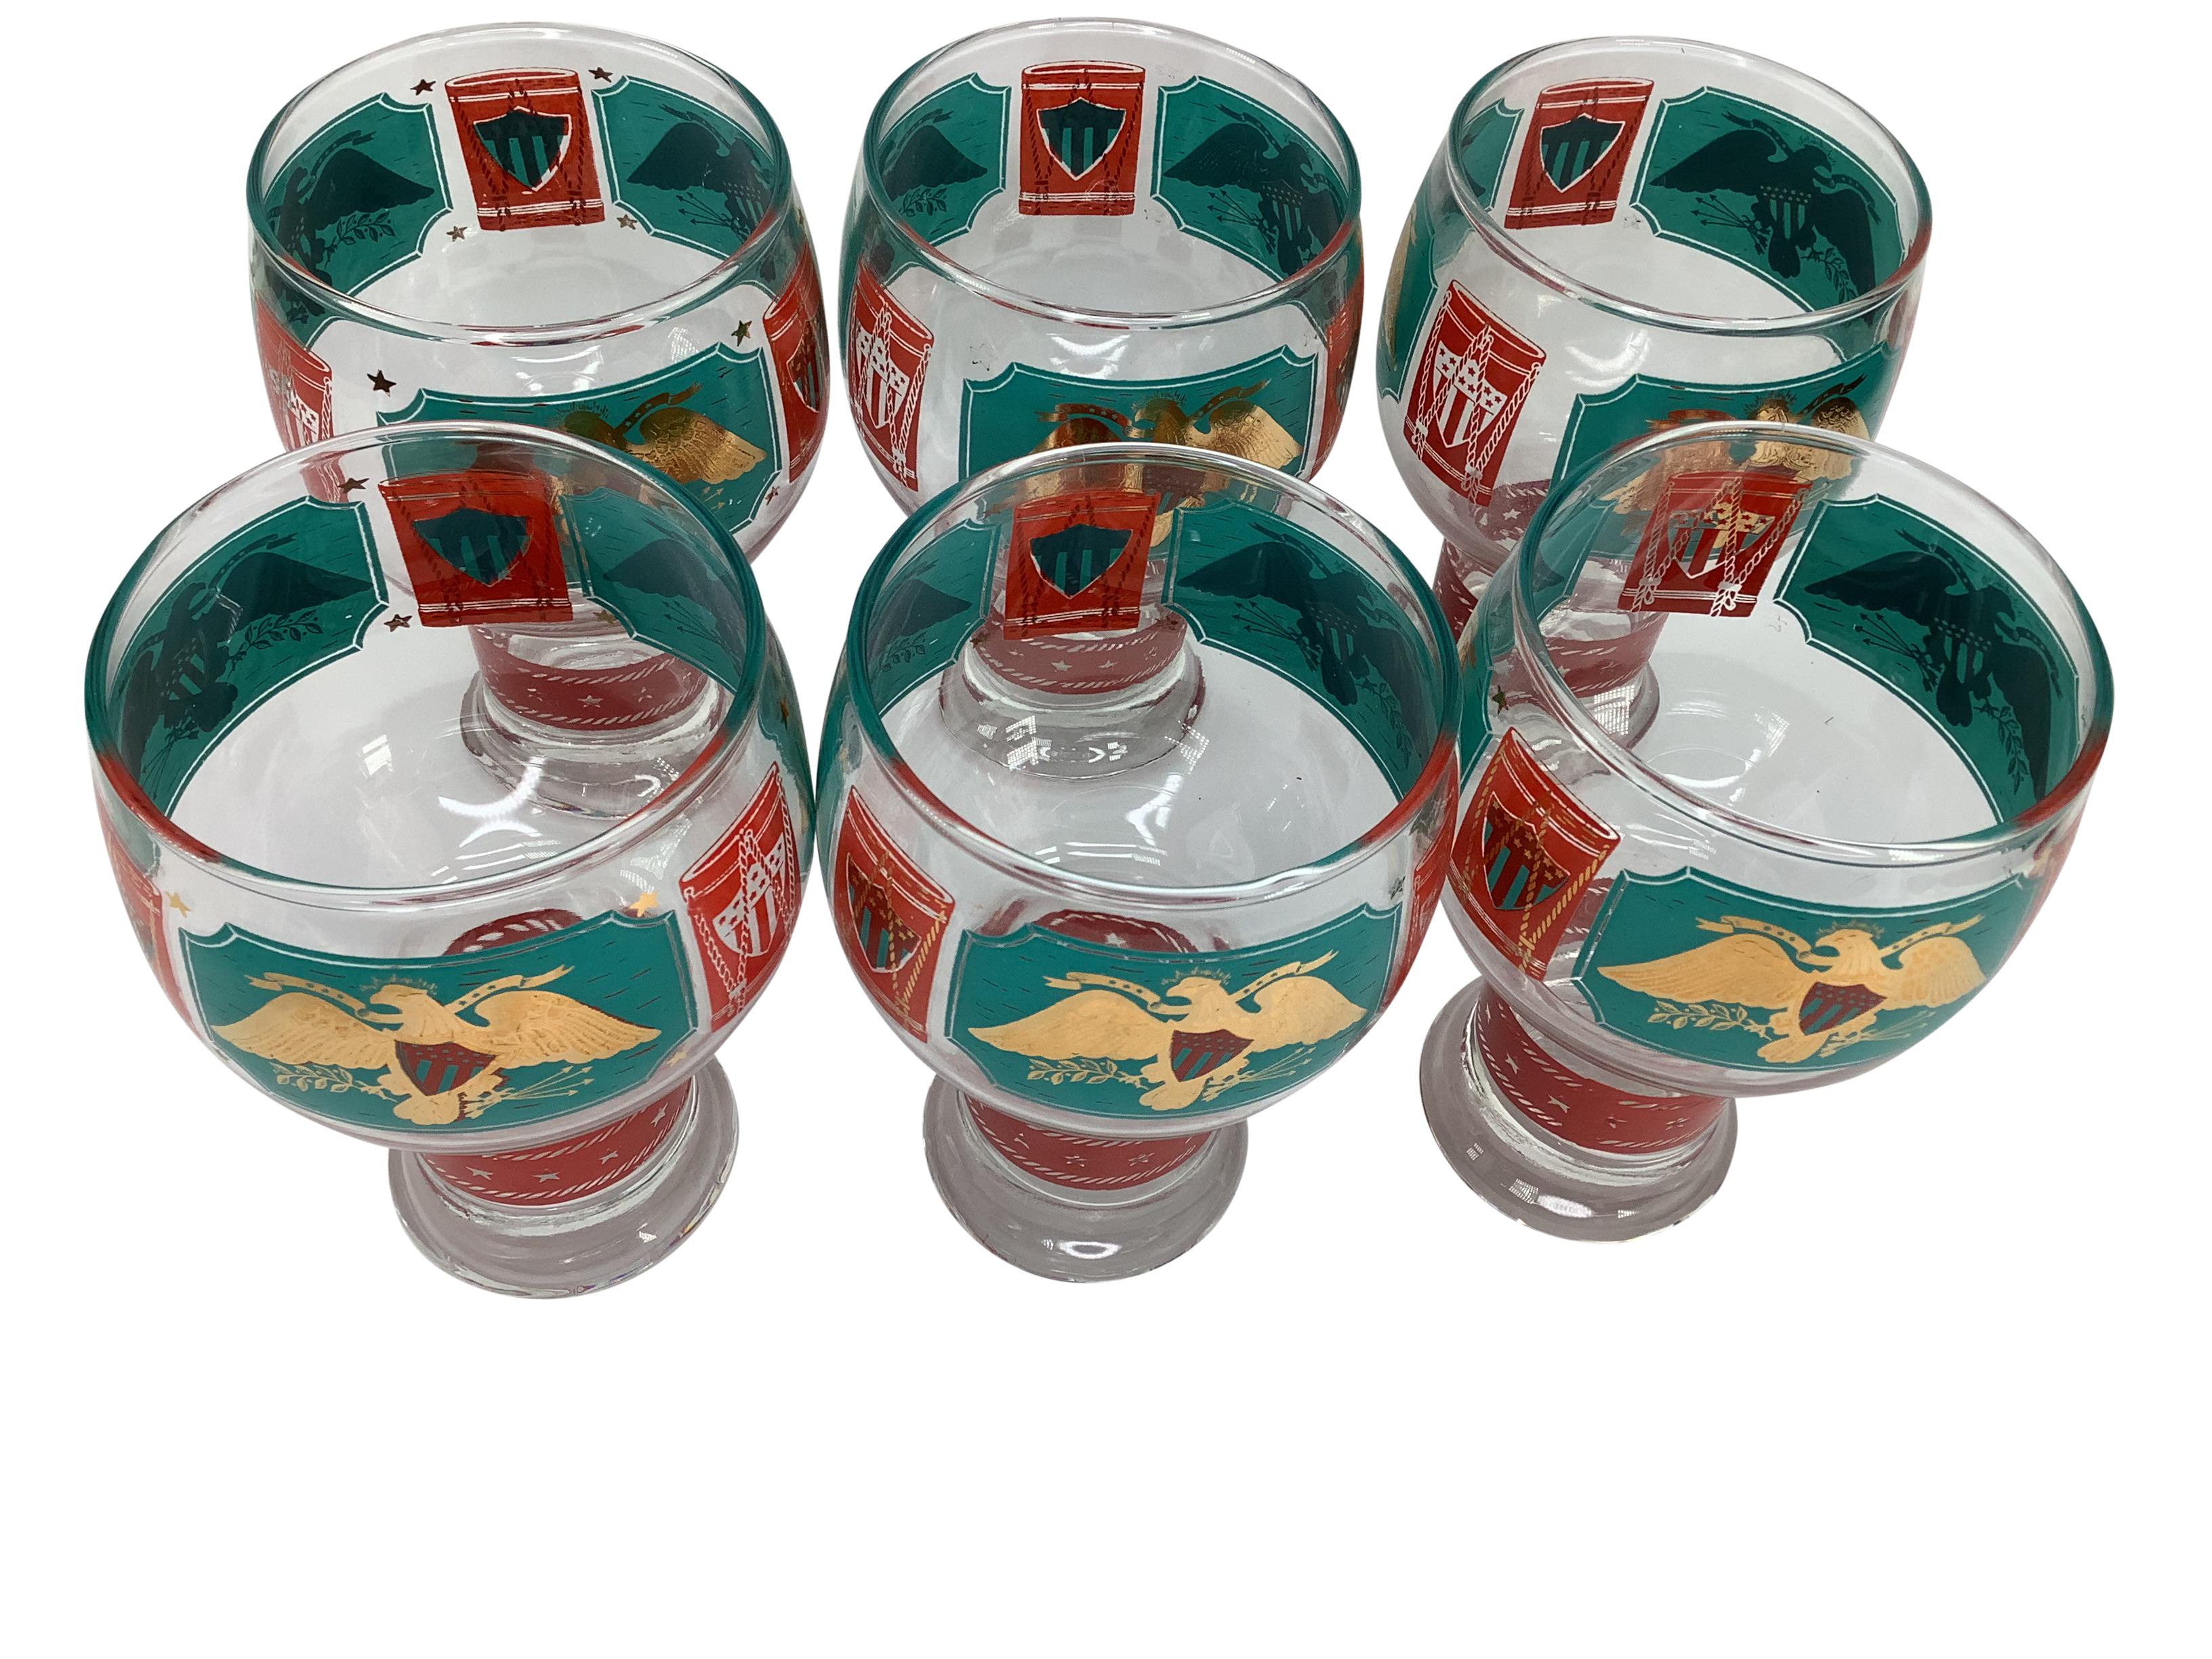 Set of 6 Mid-Century Modern Cera beer glasses in teal and red enamel with 22 karat gold. Decorated with gilt eagles, shields, and stars. Glasses measure 5 1/2